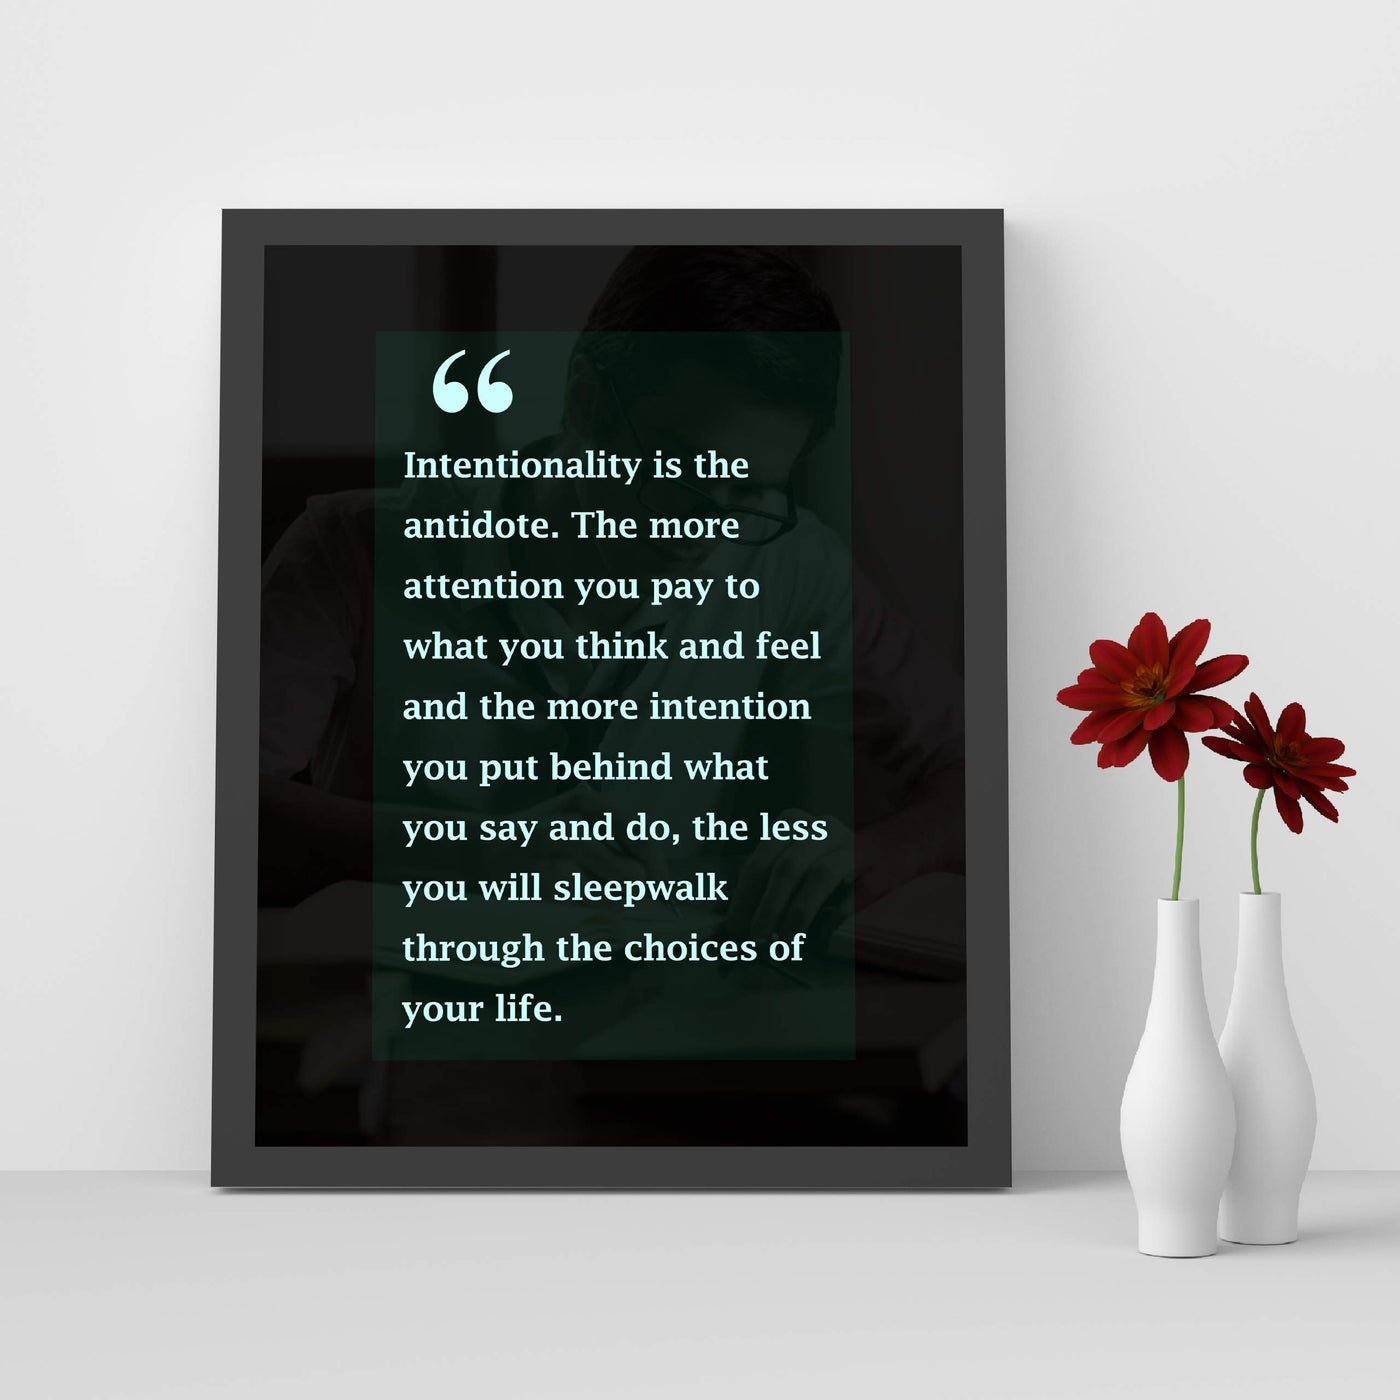 Intentionality Is the Antidote Motivational Quotes Wall Art Sign -8 x 10" Modern Typographic Poster Print-Ready to Frame. Inspirational Decor for Home-Office-Desk-School-Dorm. Great for Motivation!